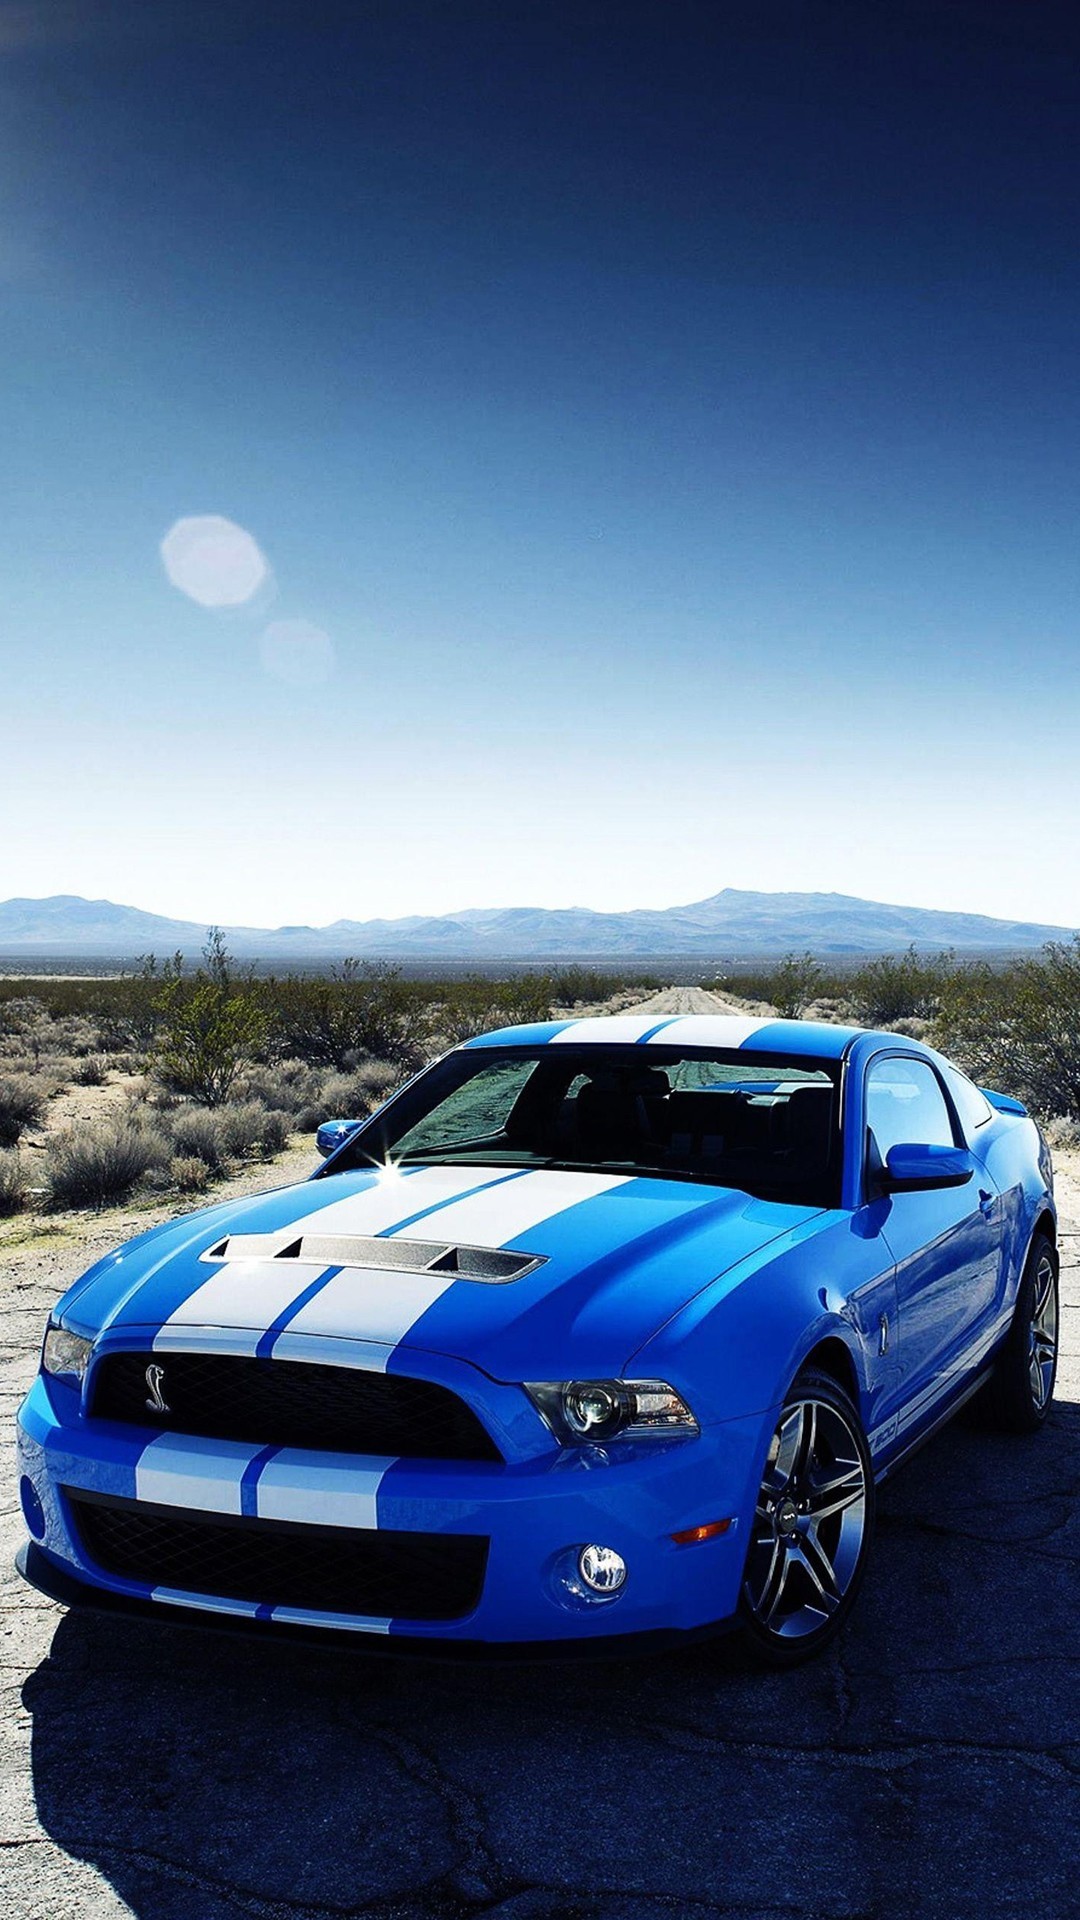 1080x1920 Speed Ford Car iPhone 6 plus wallpaper - sky, mountain, grass